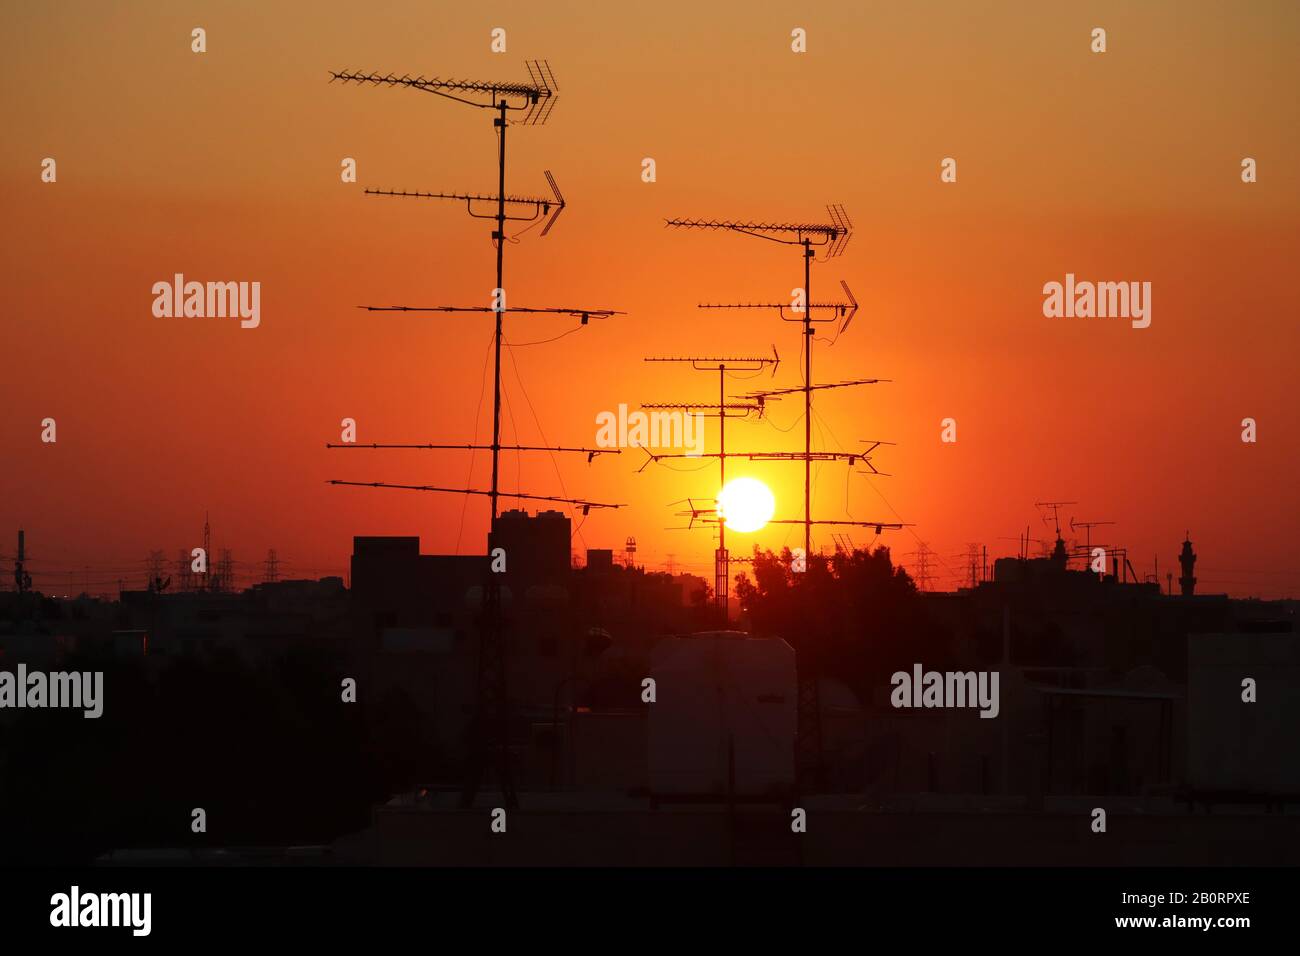 Analogue television reception antennas on a rooftop silhouetted against a setting sun Stock Photo